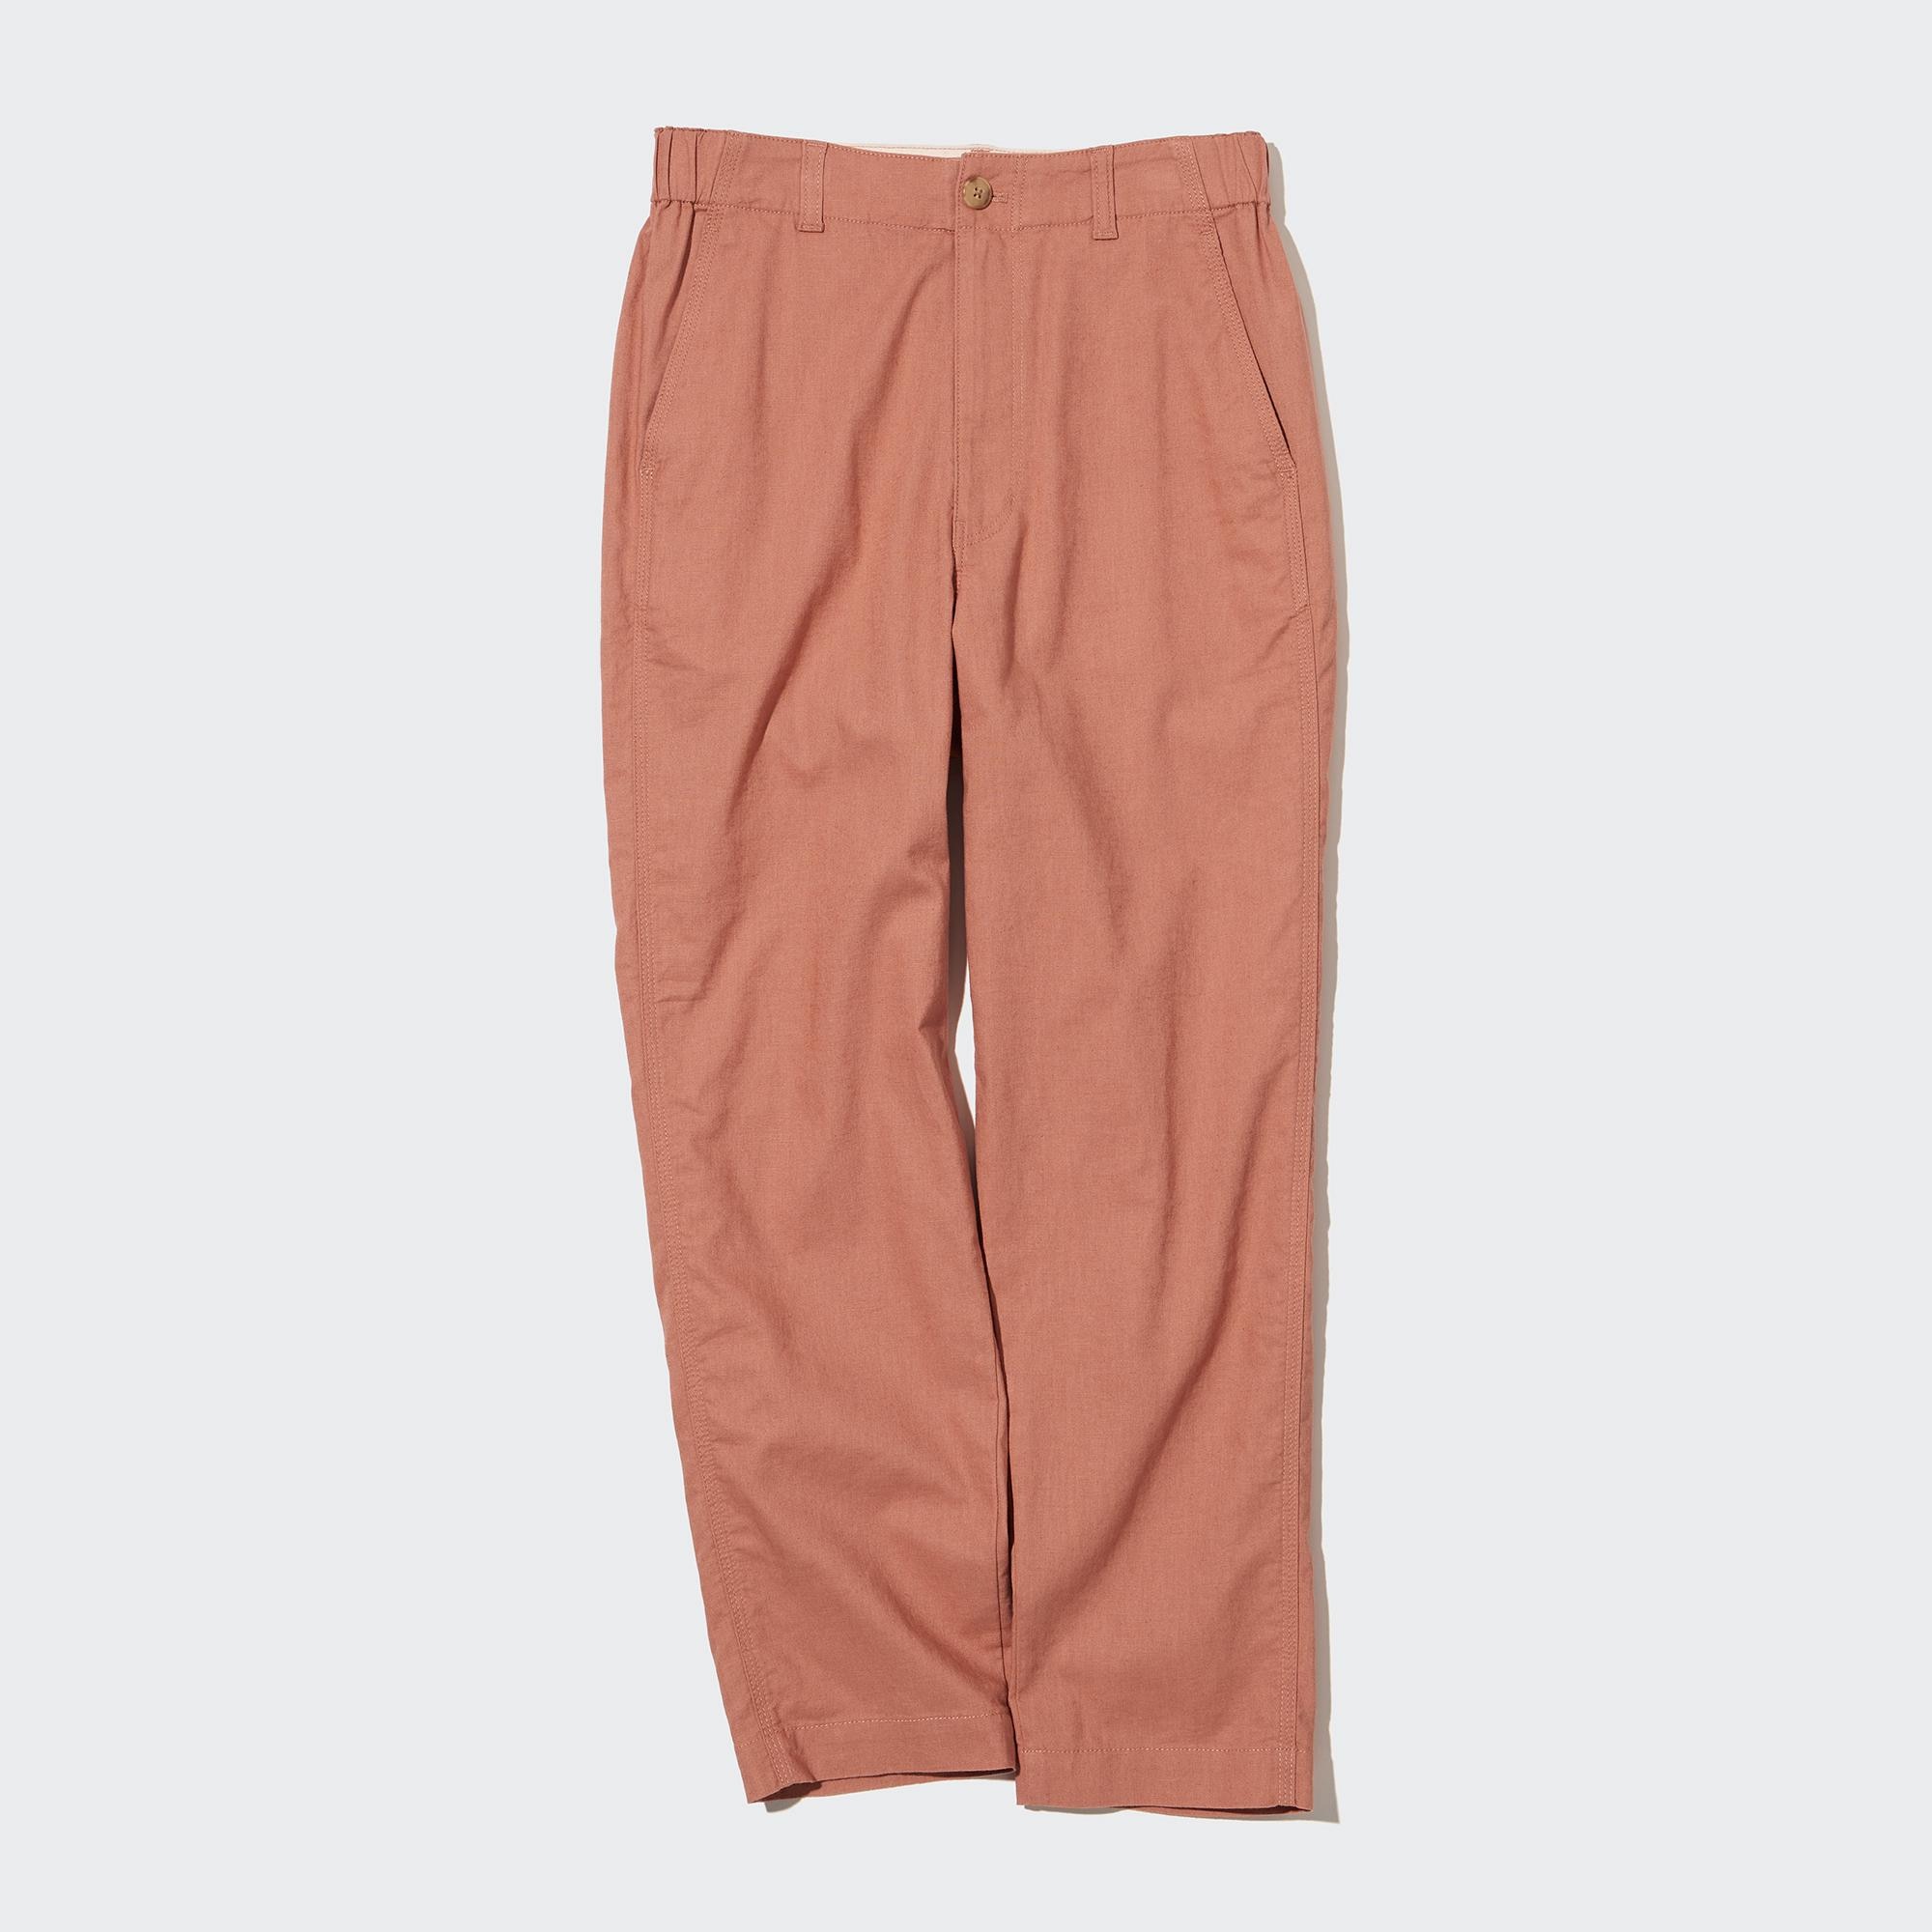 Satan Men Trouser at Rs.1650/Piece in udupi offer by Cotton king